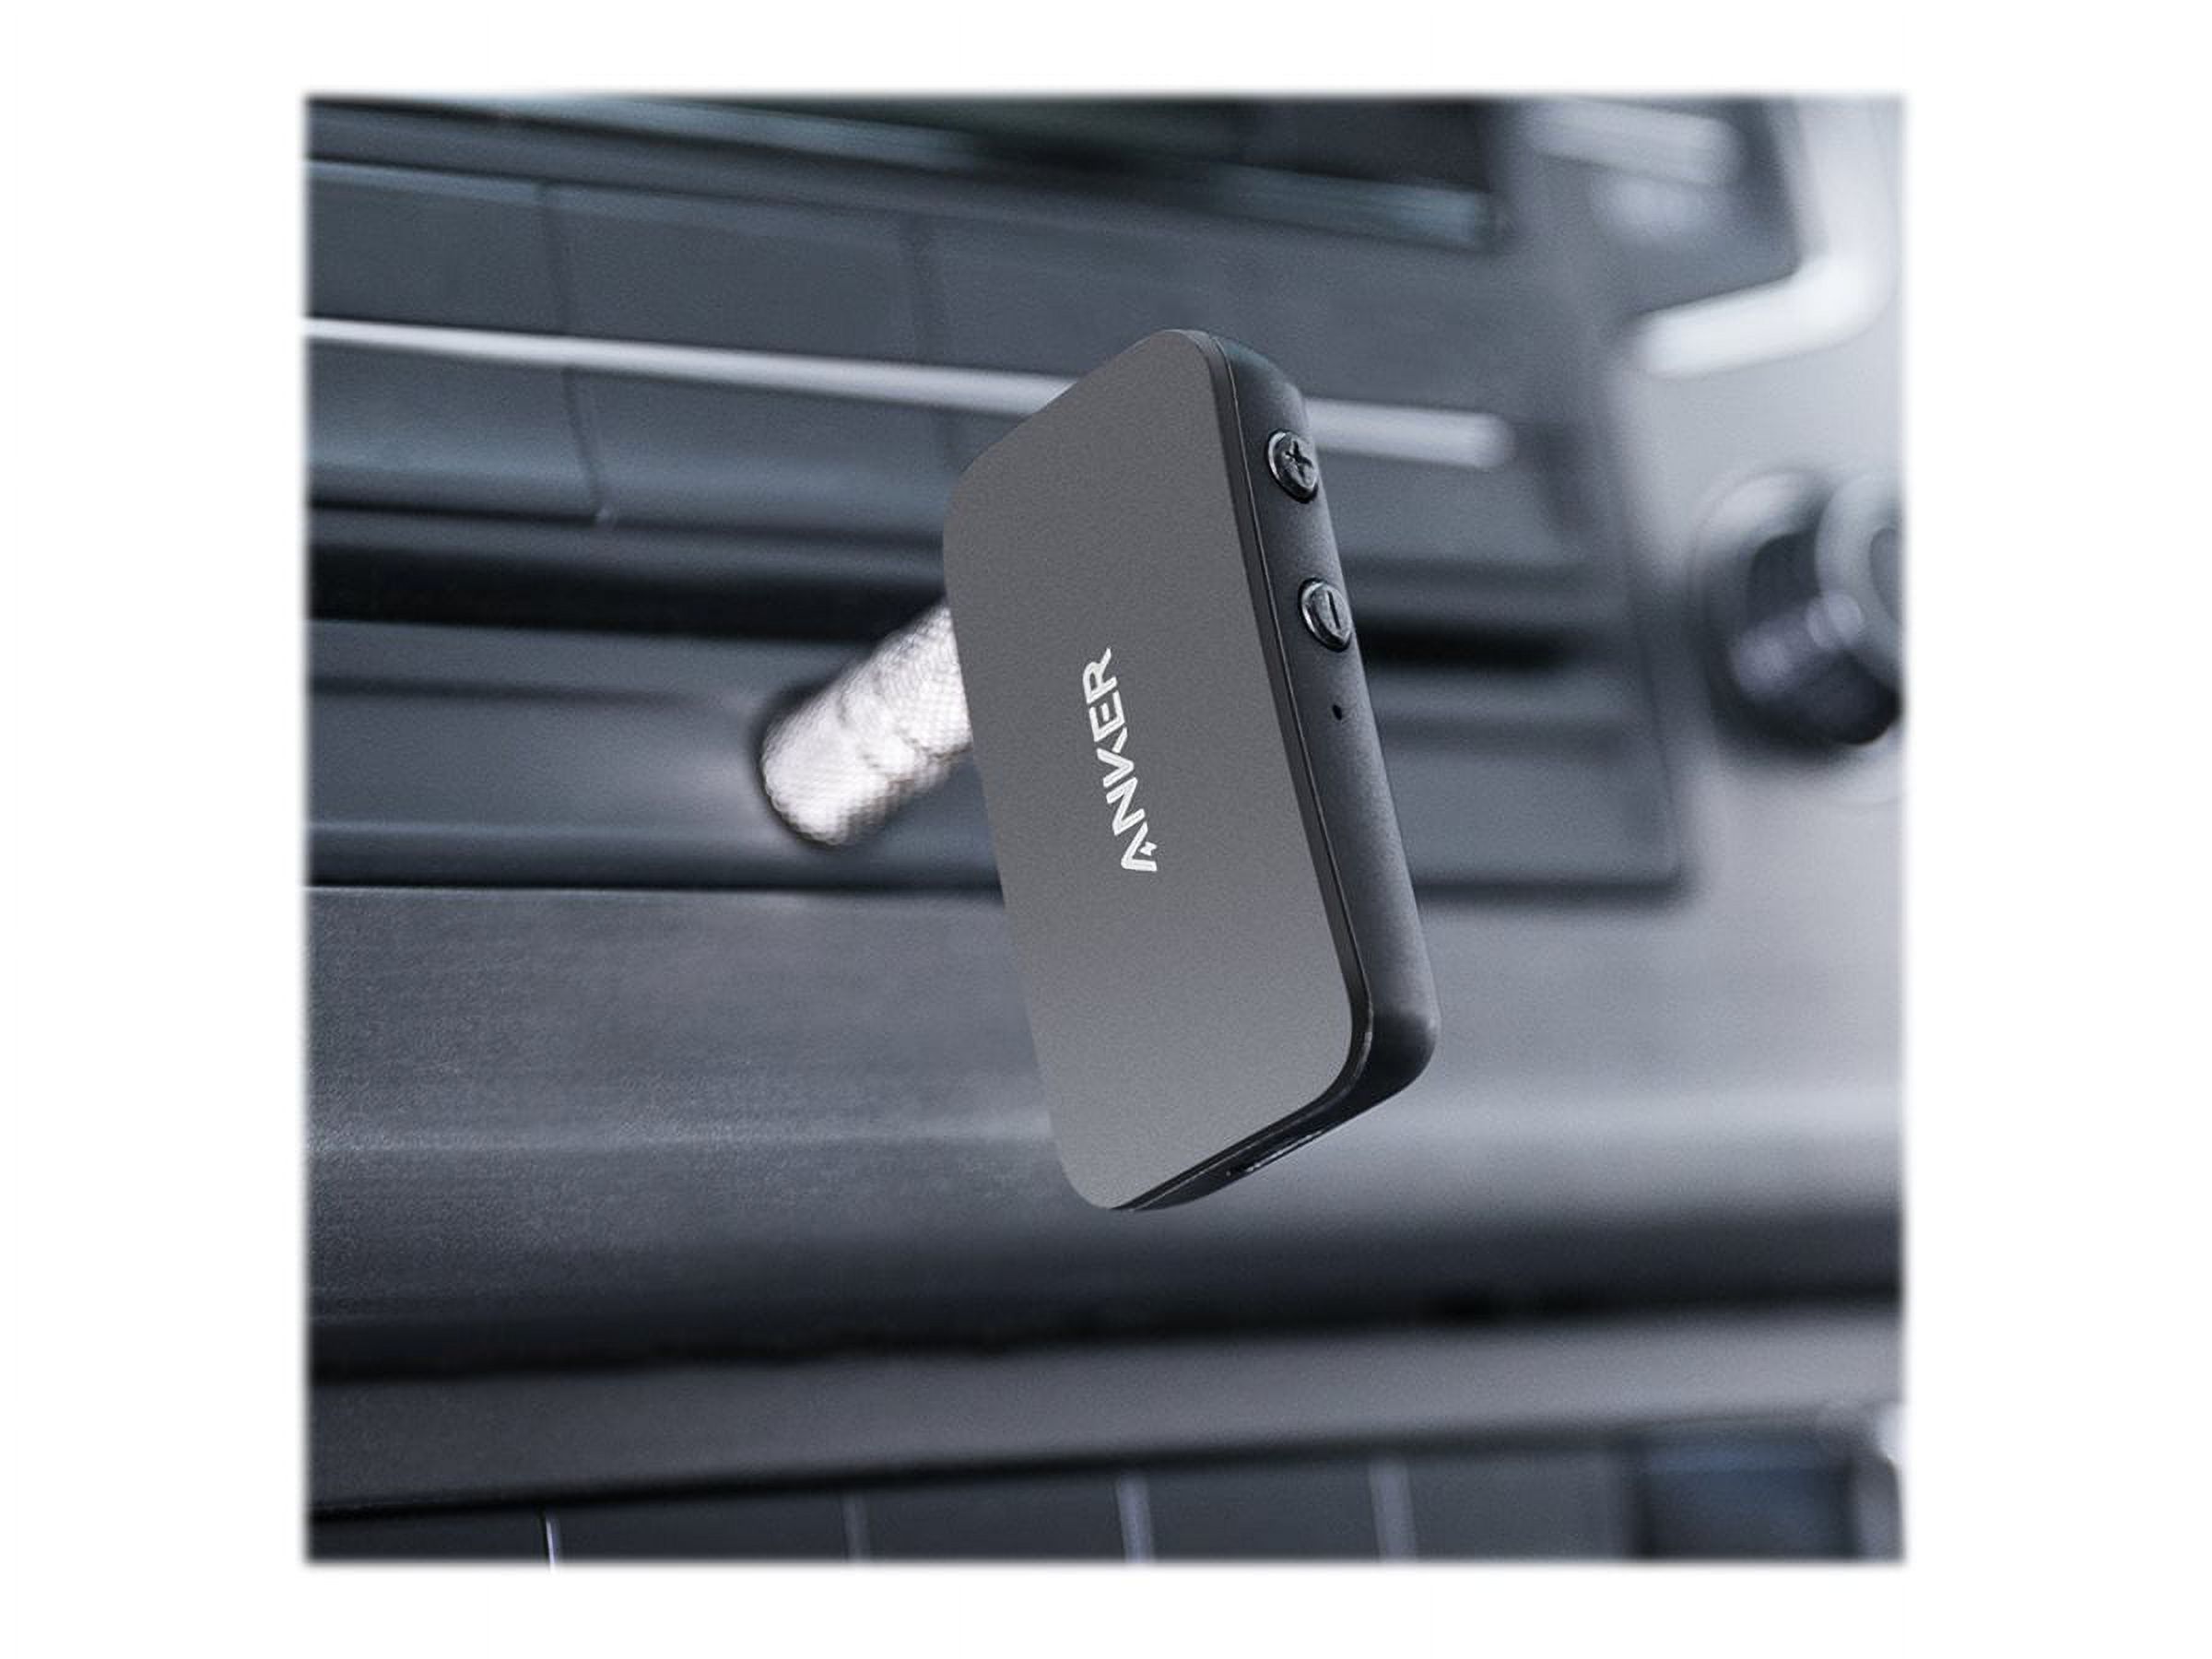 Anker Soundsync A3352 Bluetooth Receiver for Music Streaming with Bluetooth 5.0, 12-Hour Battery Life, Handsfree Calls, Dual Device Connection, for Car, Home Stereo, Headphones, Speakers - image 4 of 5